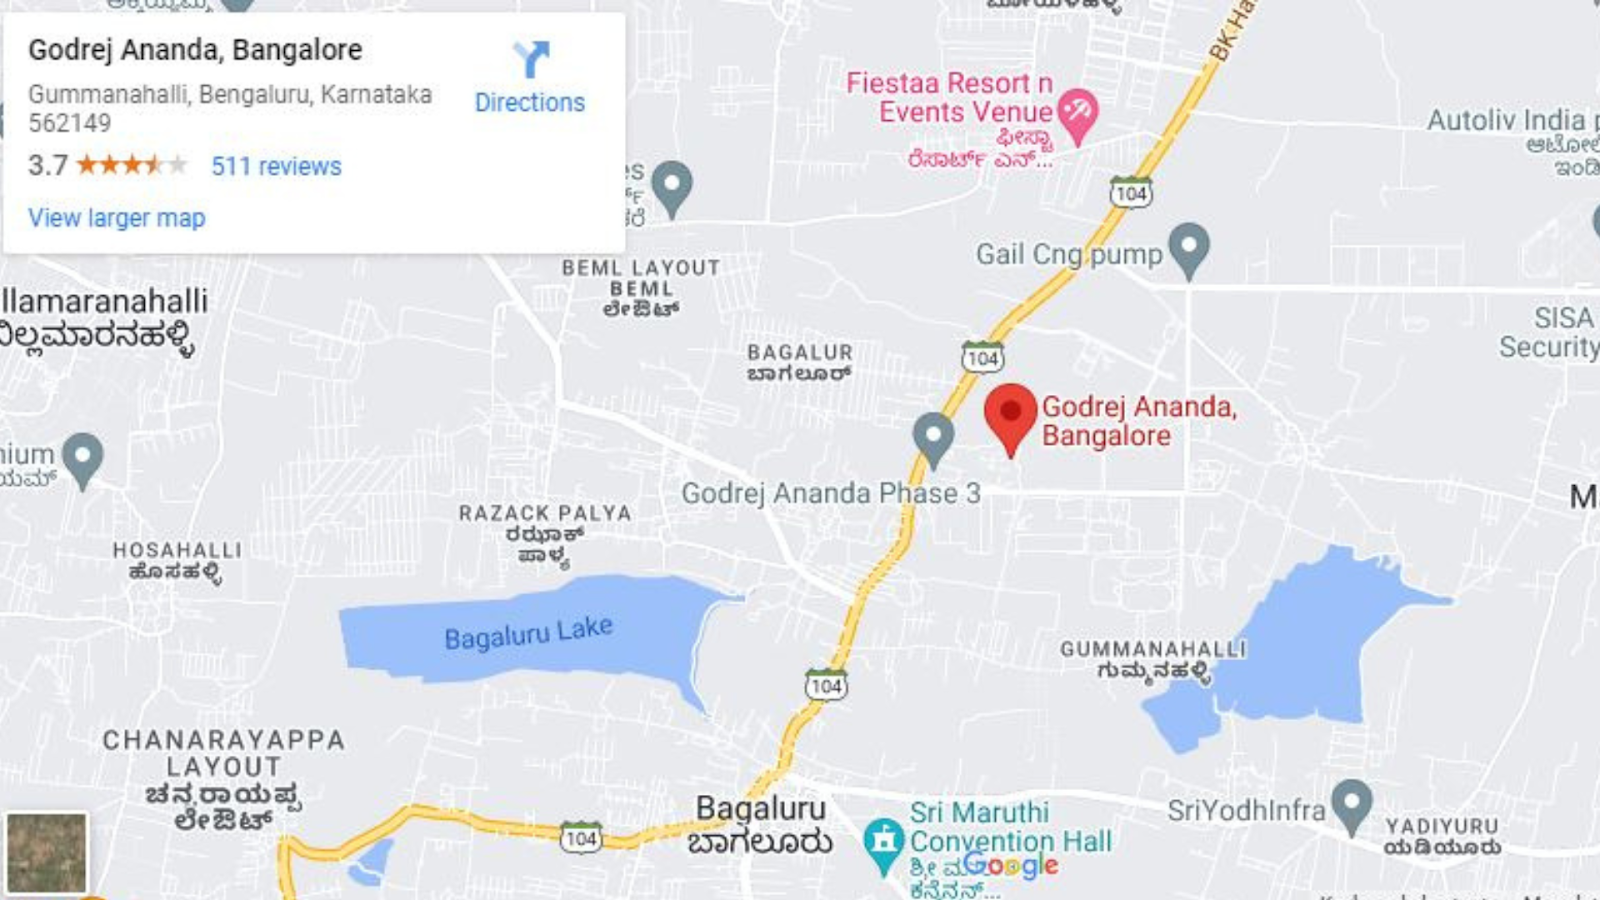 The best location for your luxury lifestyle and best for the future will be Godrej Ananda.